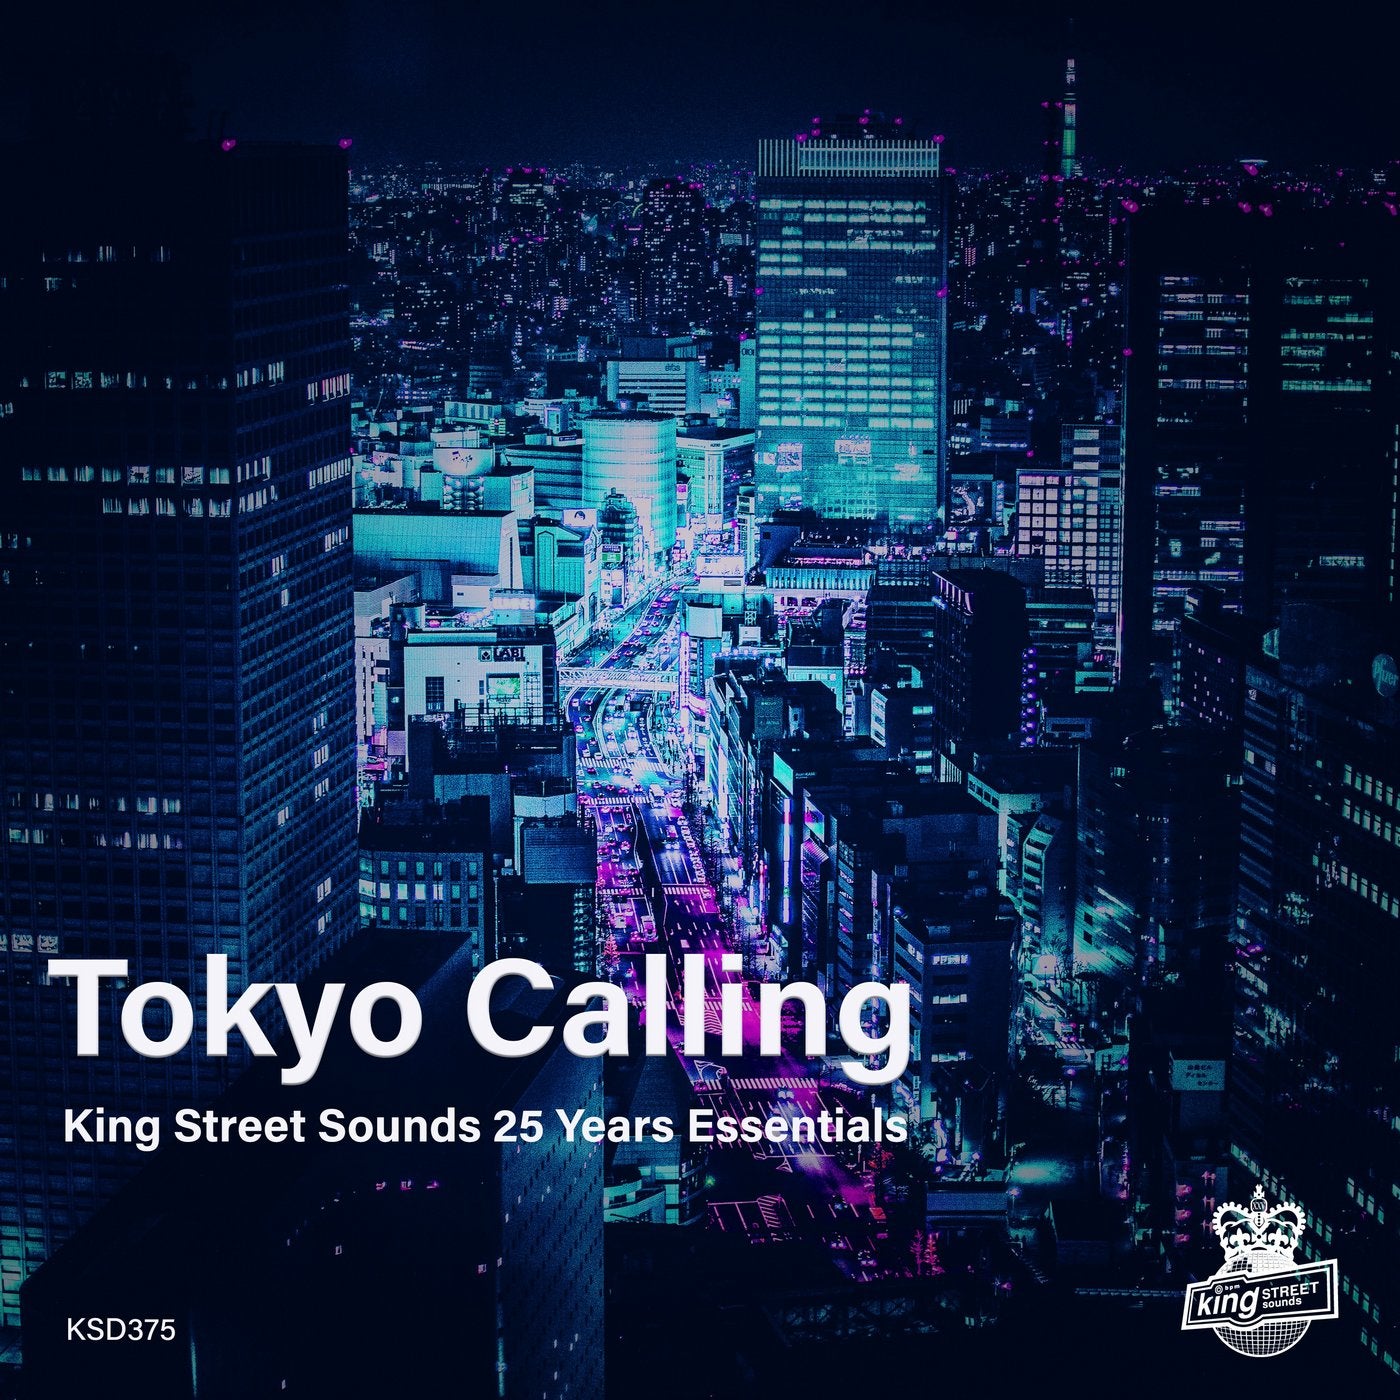 Tokyo Calling King Street Sounds 25 Years Essentials From King Street Sounds On Beatport